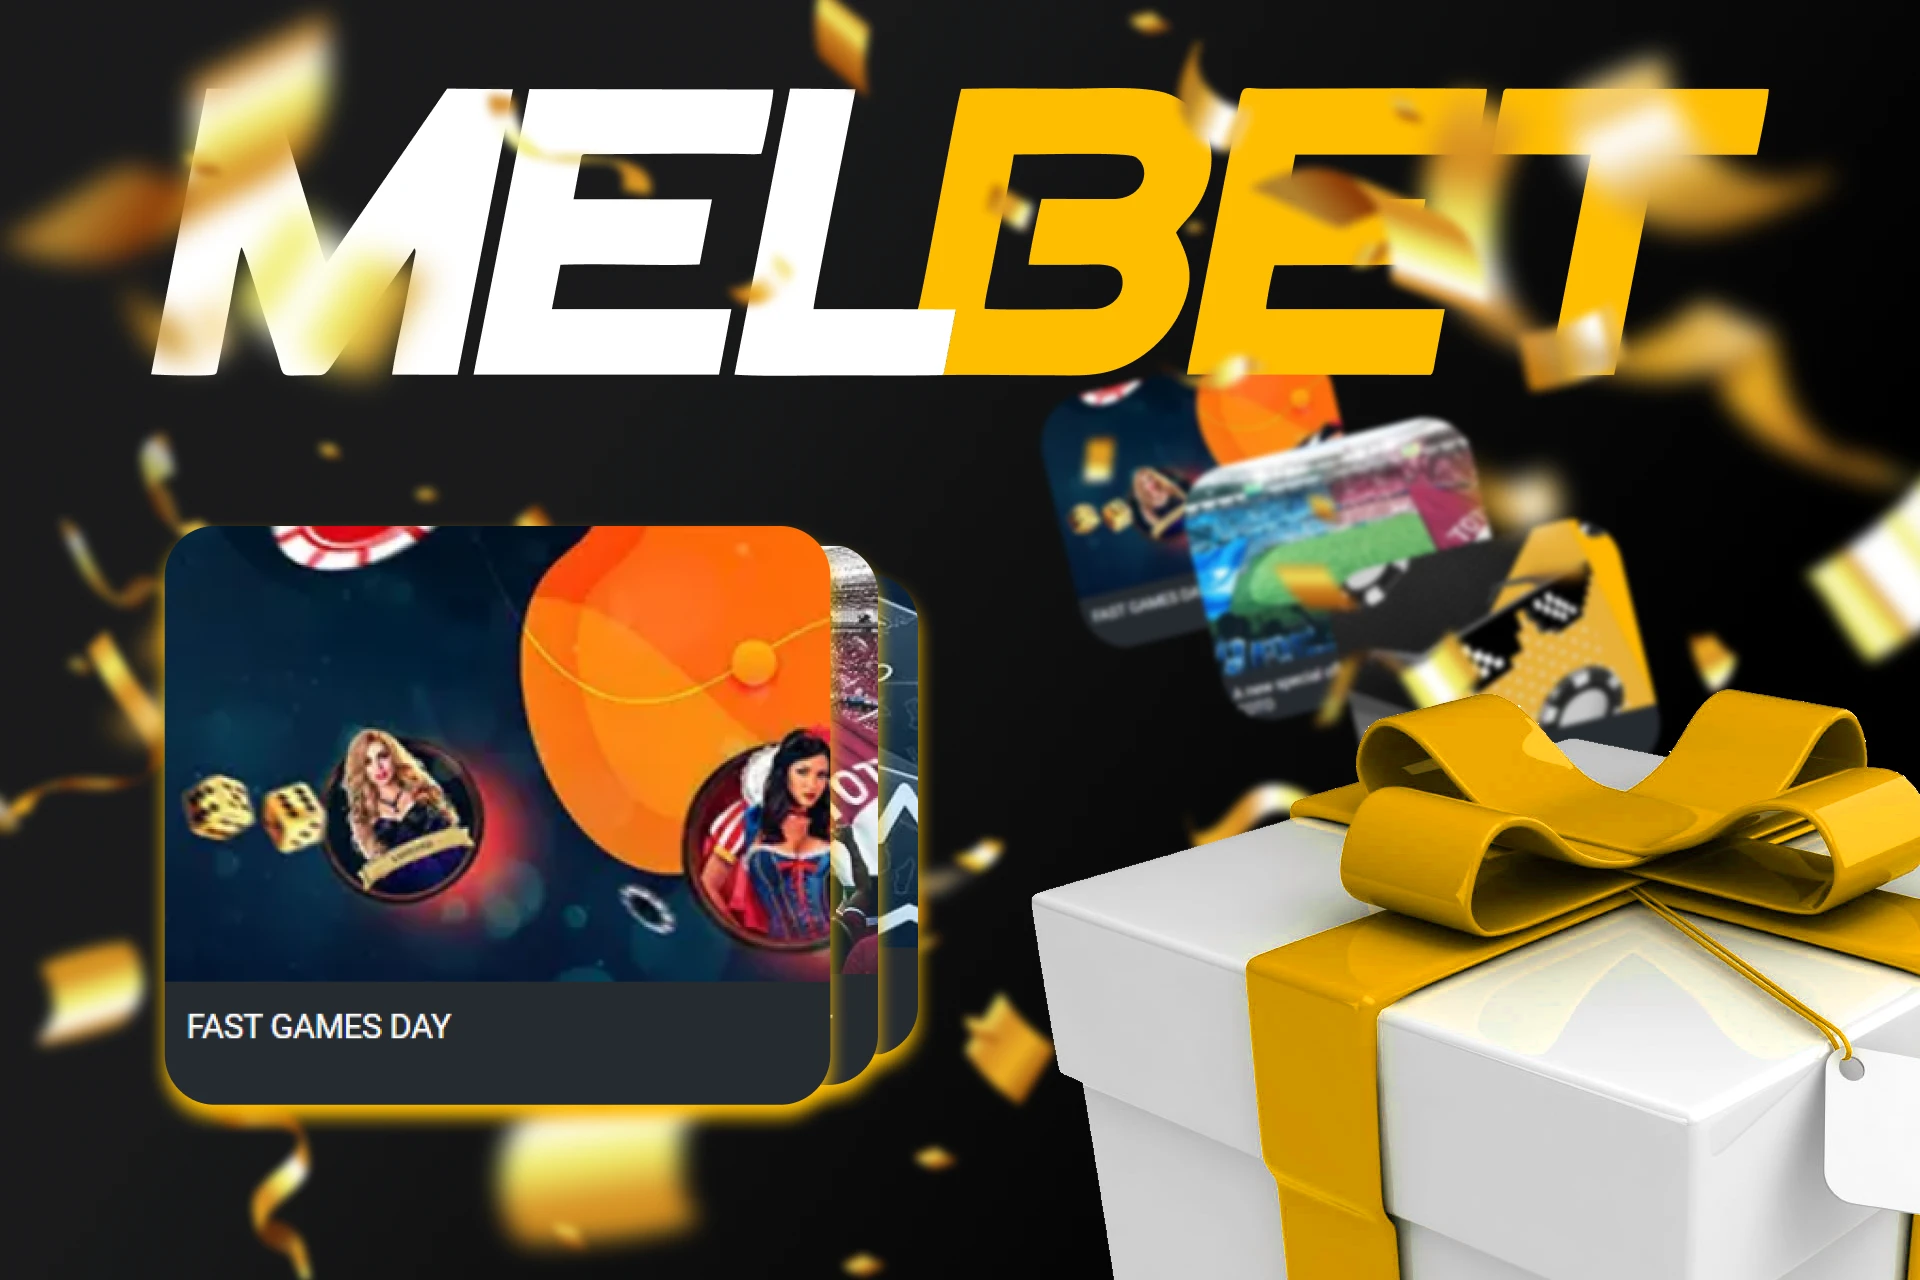 There is a bonus for fast games on Melbet.